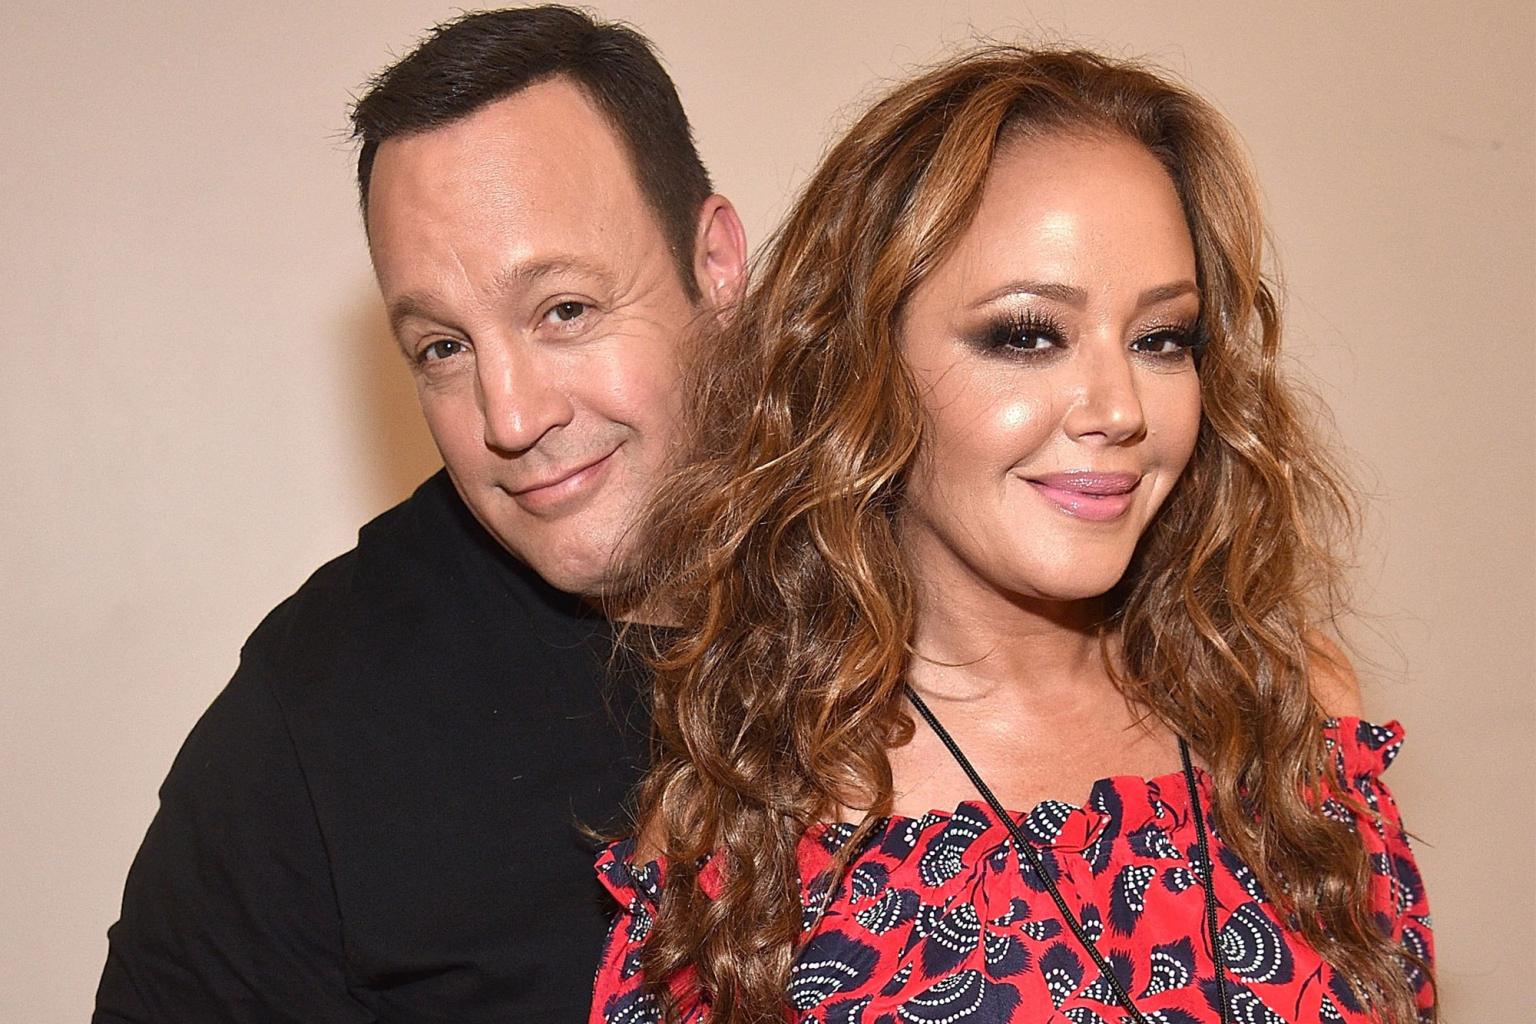 Leah Remini Will Reunite with Kevin James for Season 2 of Kevin Can Wait as Series Regular